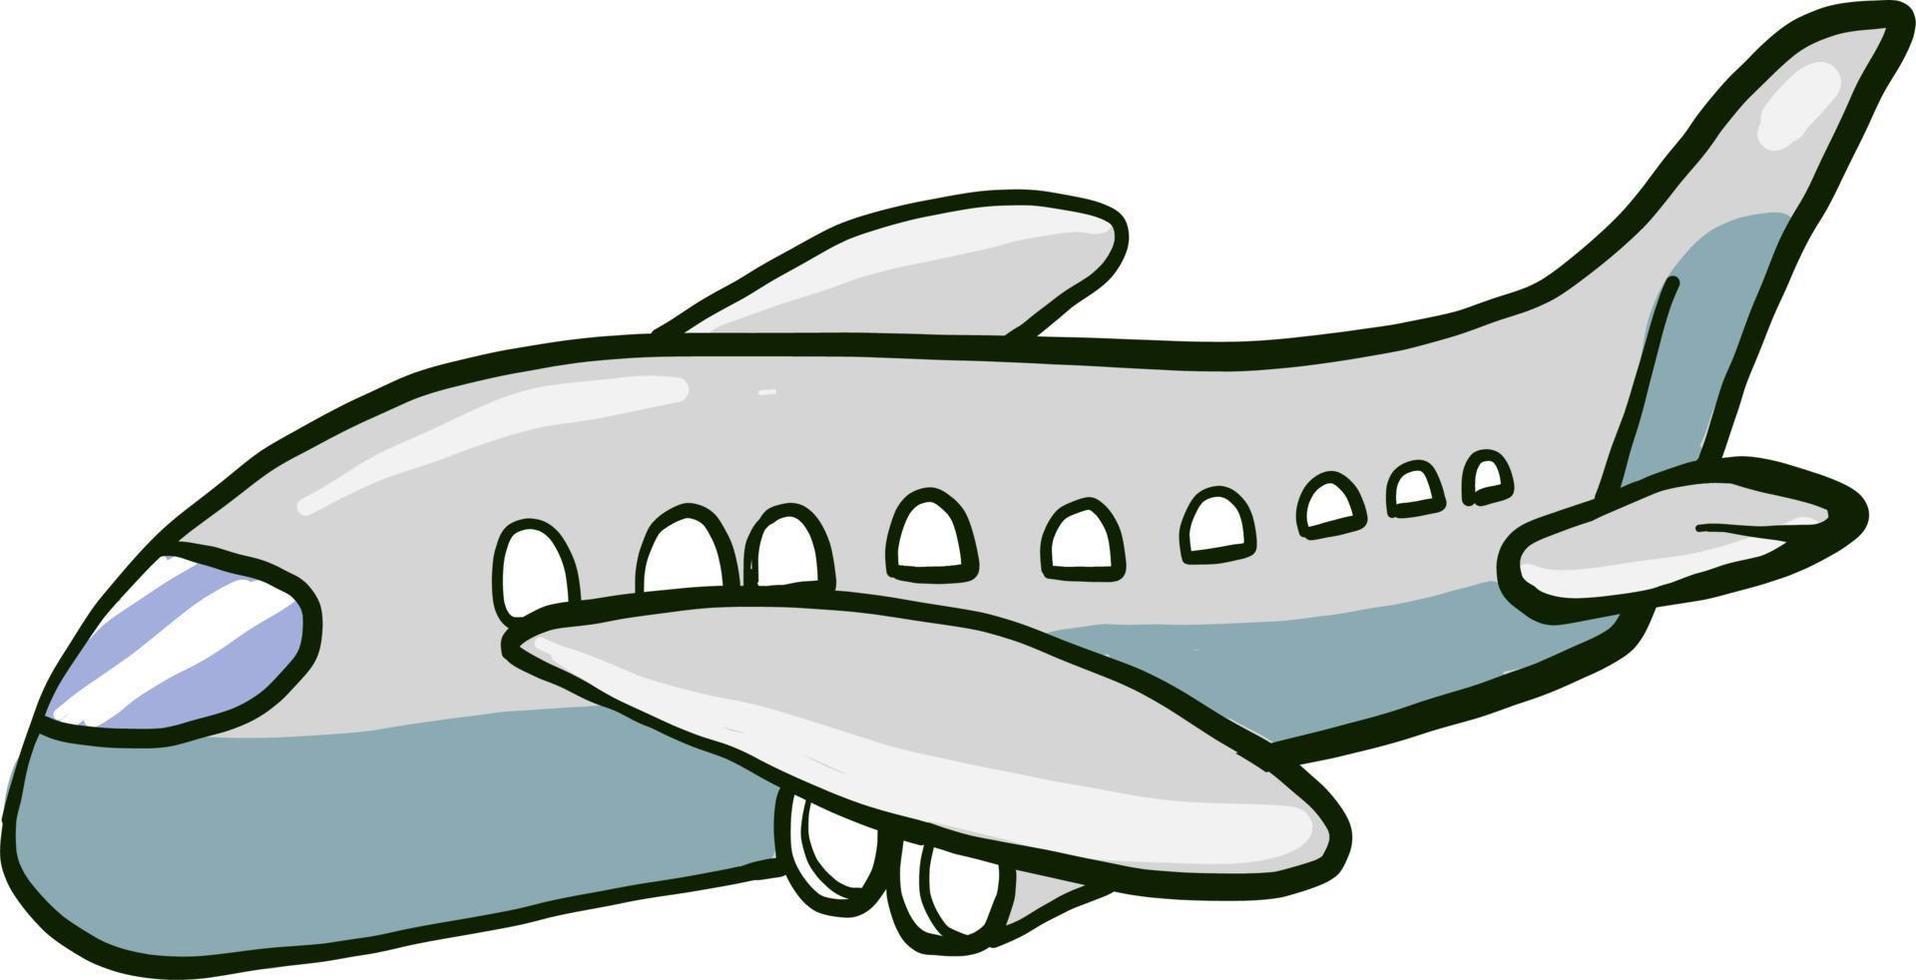 White airplane, illustration, vector on a white background.